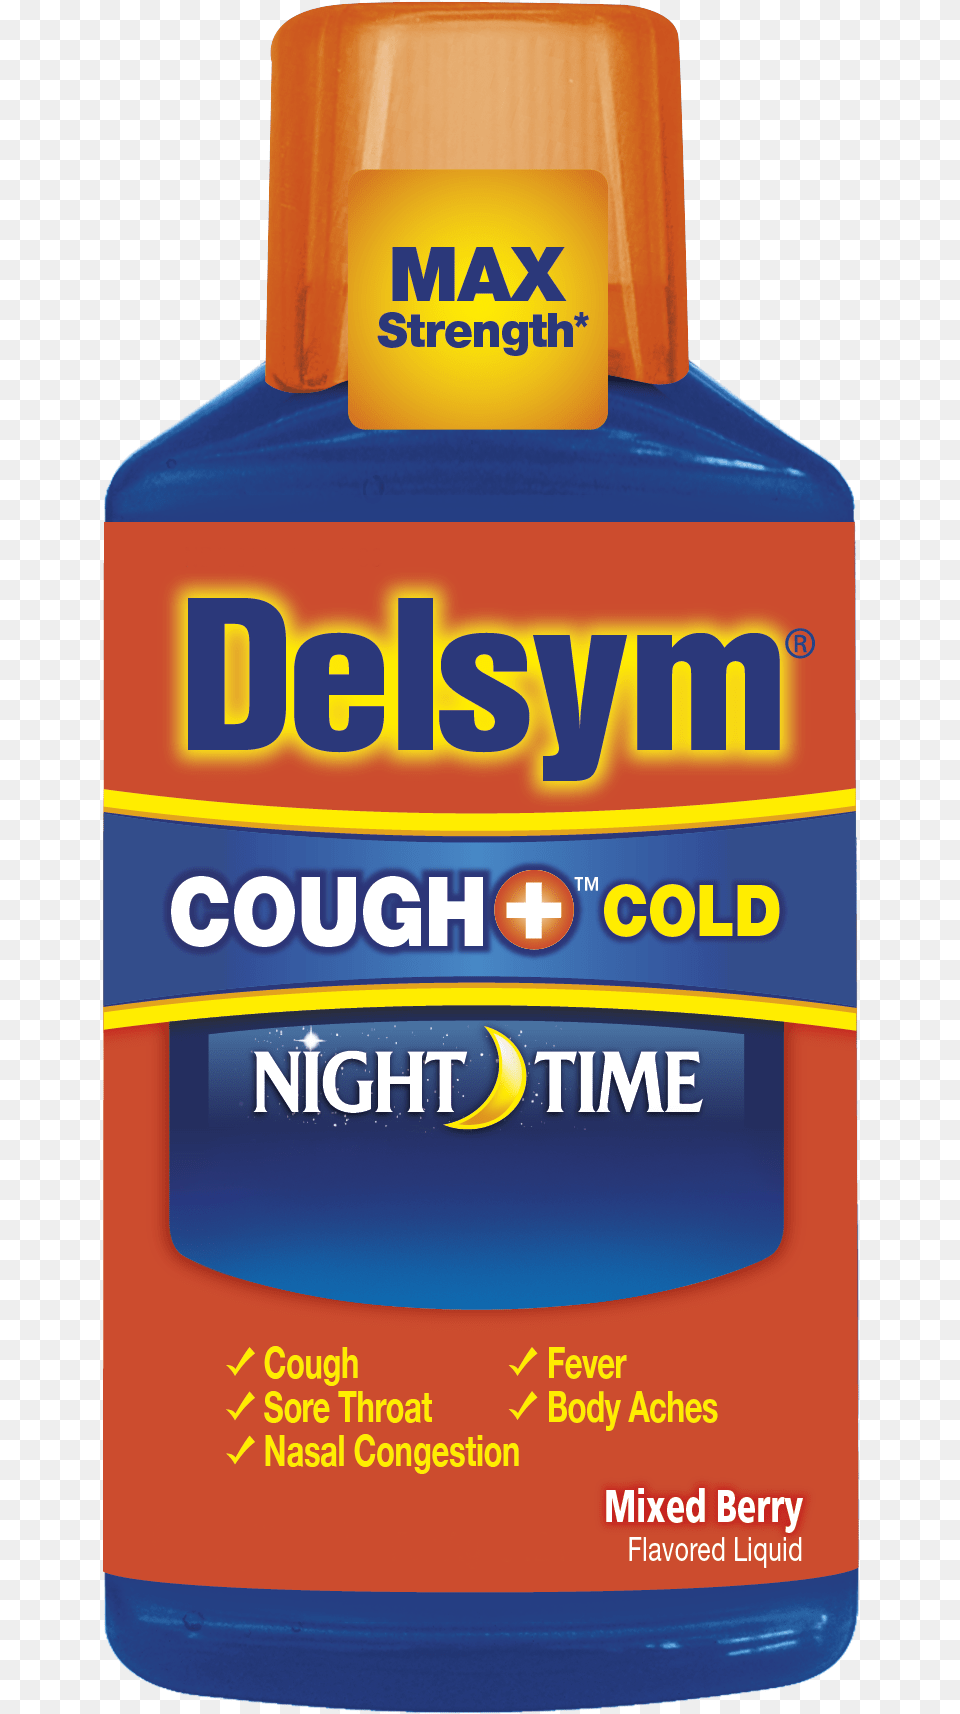 Delsym Cough Cold Night Time Cold Medicine For Adults, Bottle, Cosmetics, Sunscreen, Food Free Transparent Png